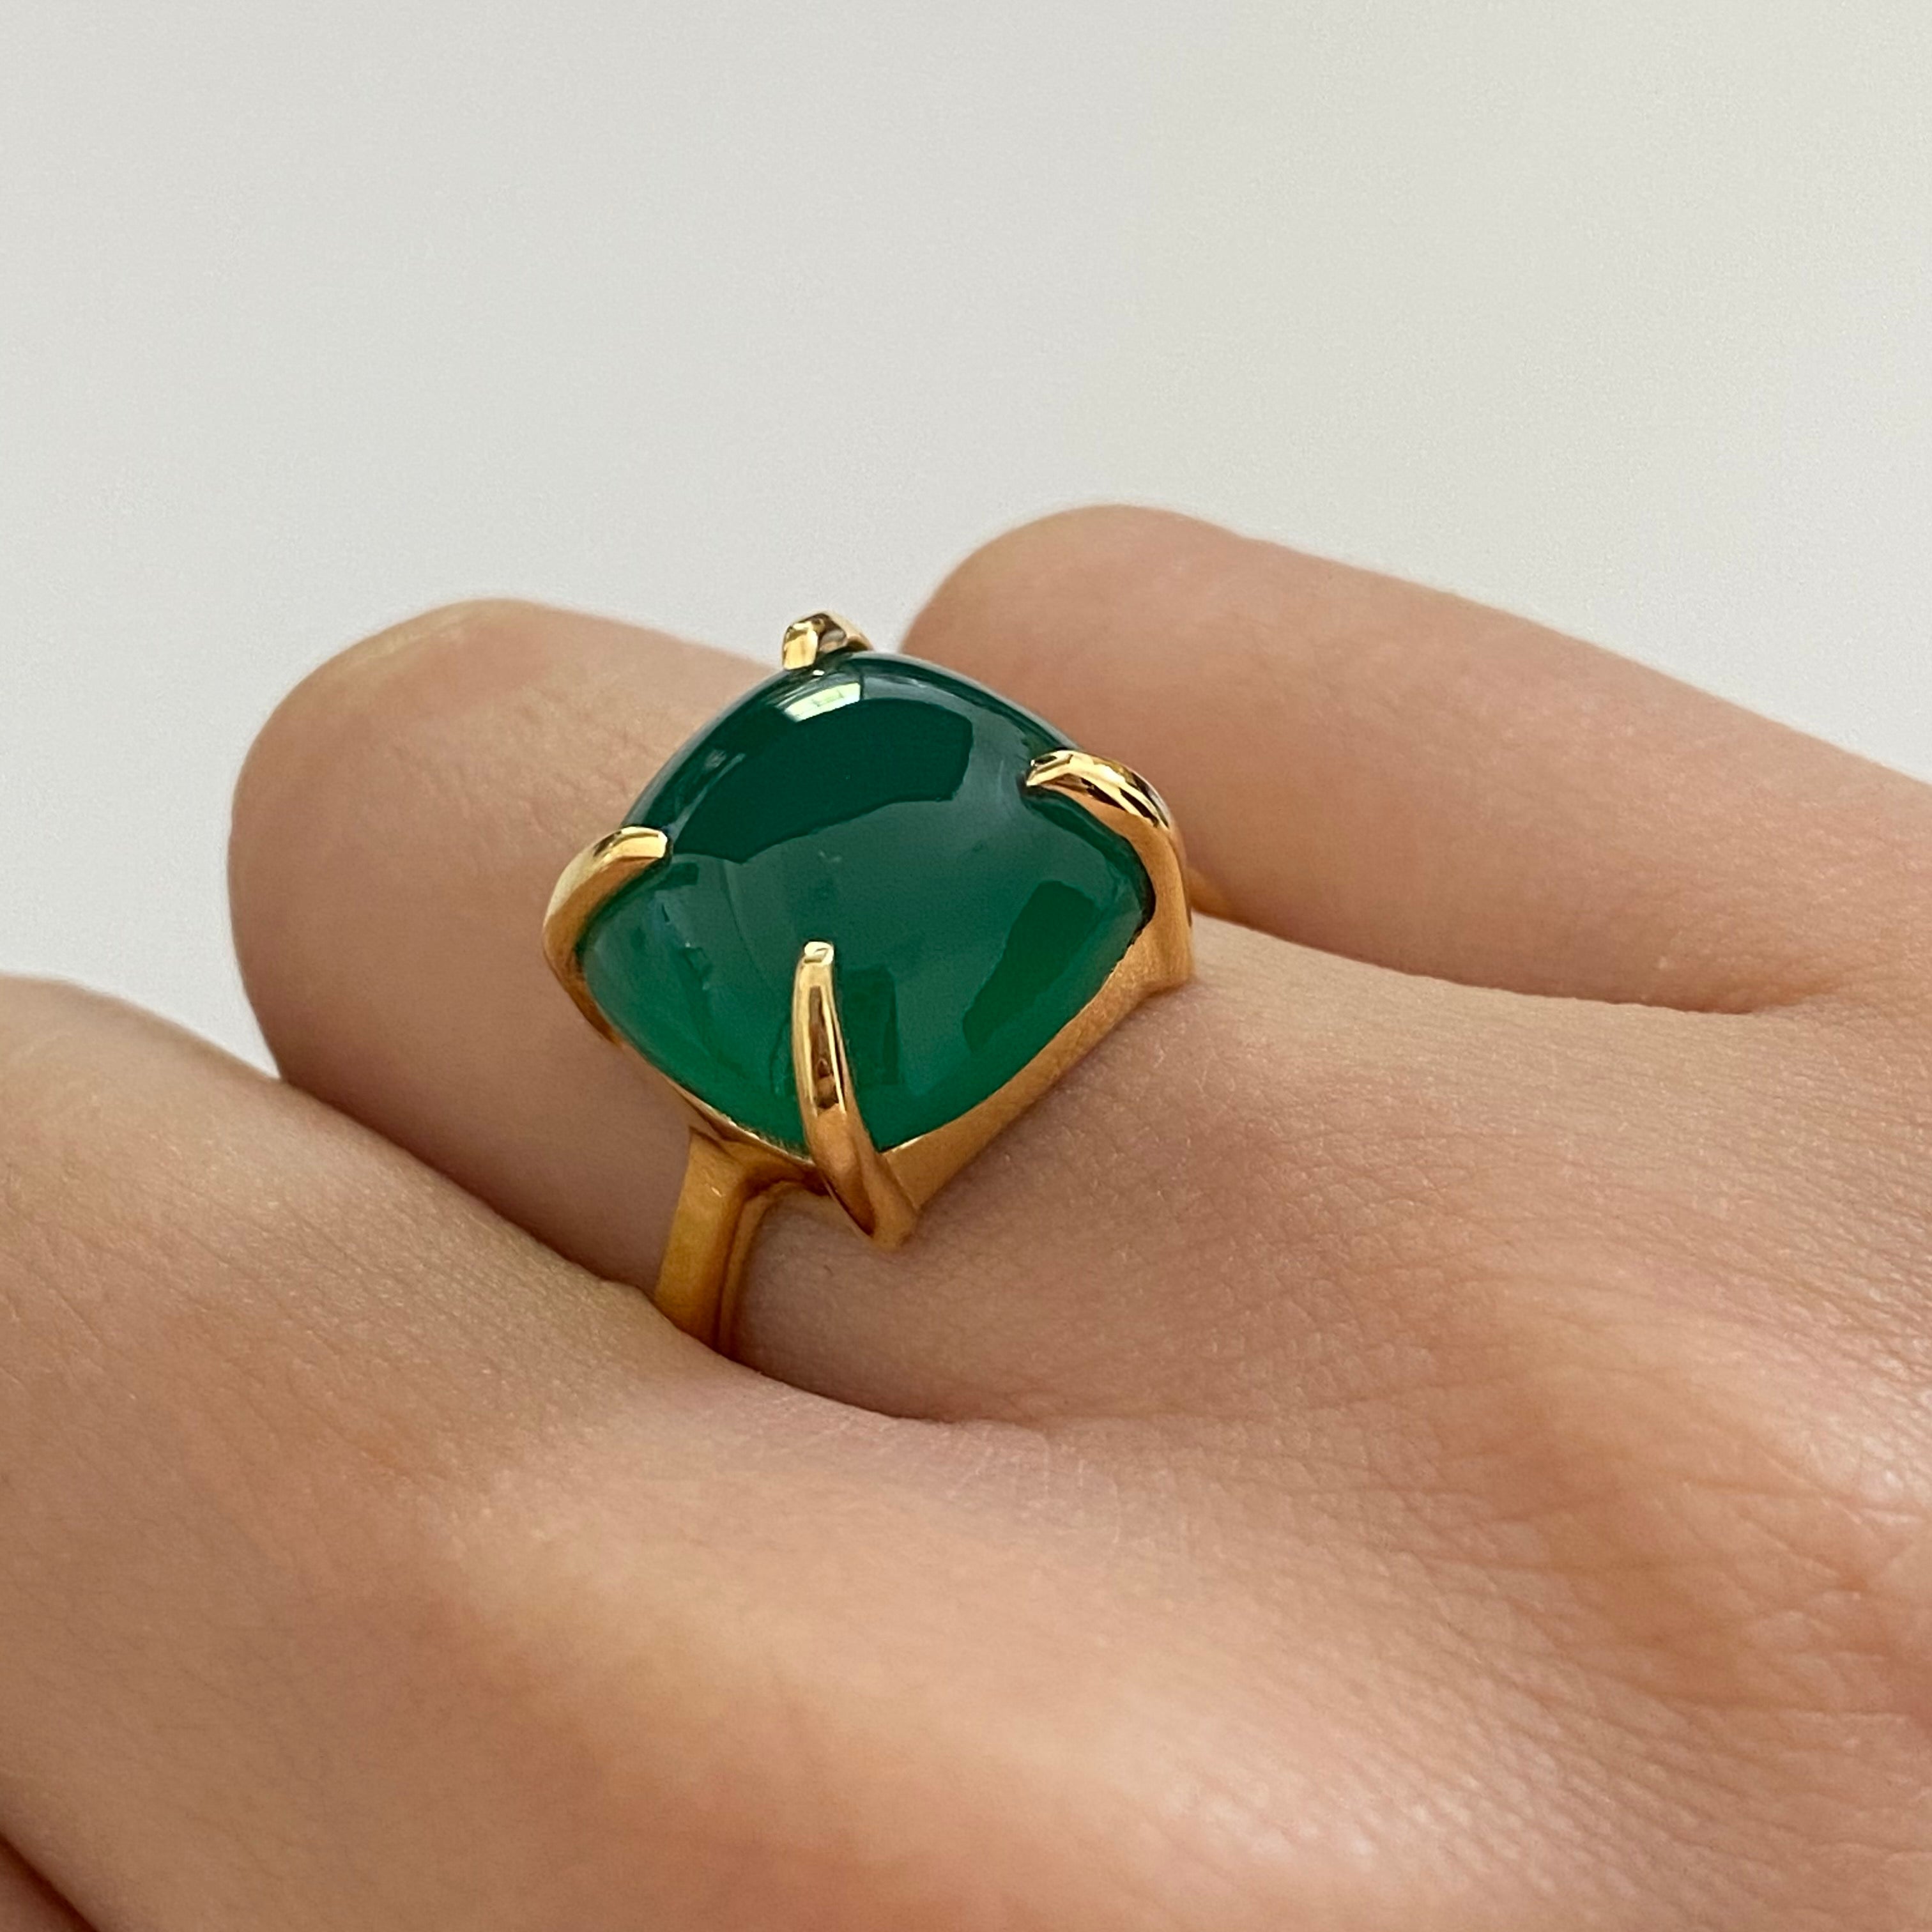 Square Cabochon Green Onyx Ring in Gold Plated Sterling Silver